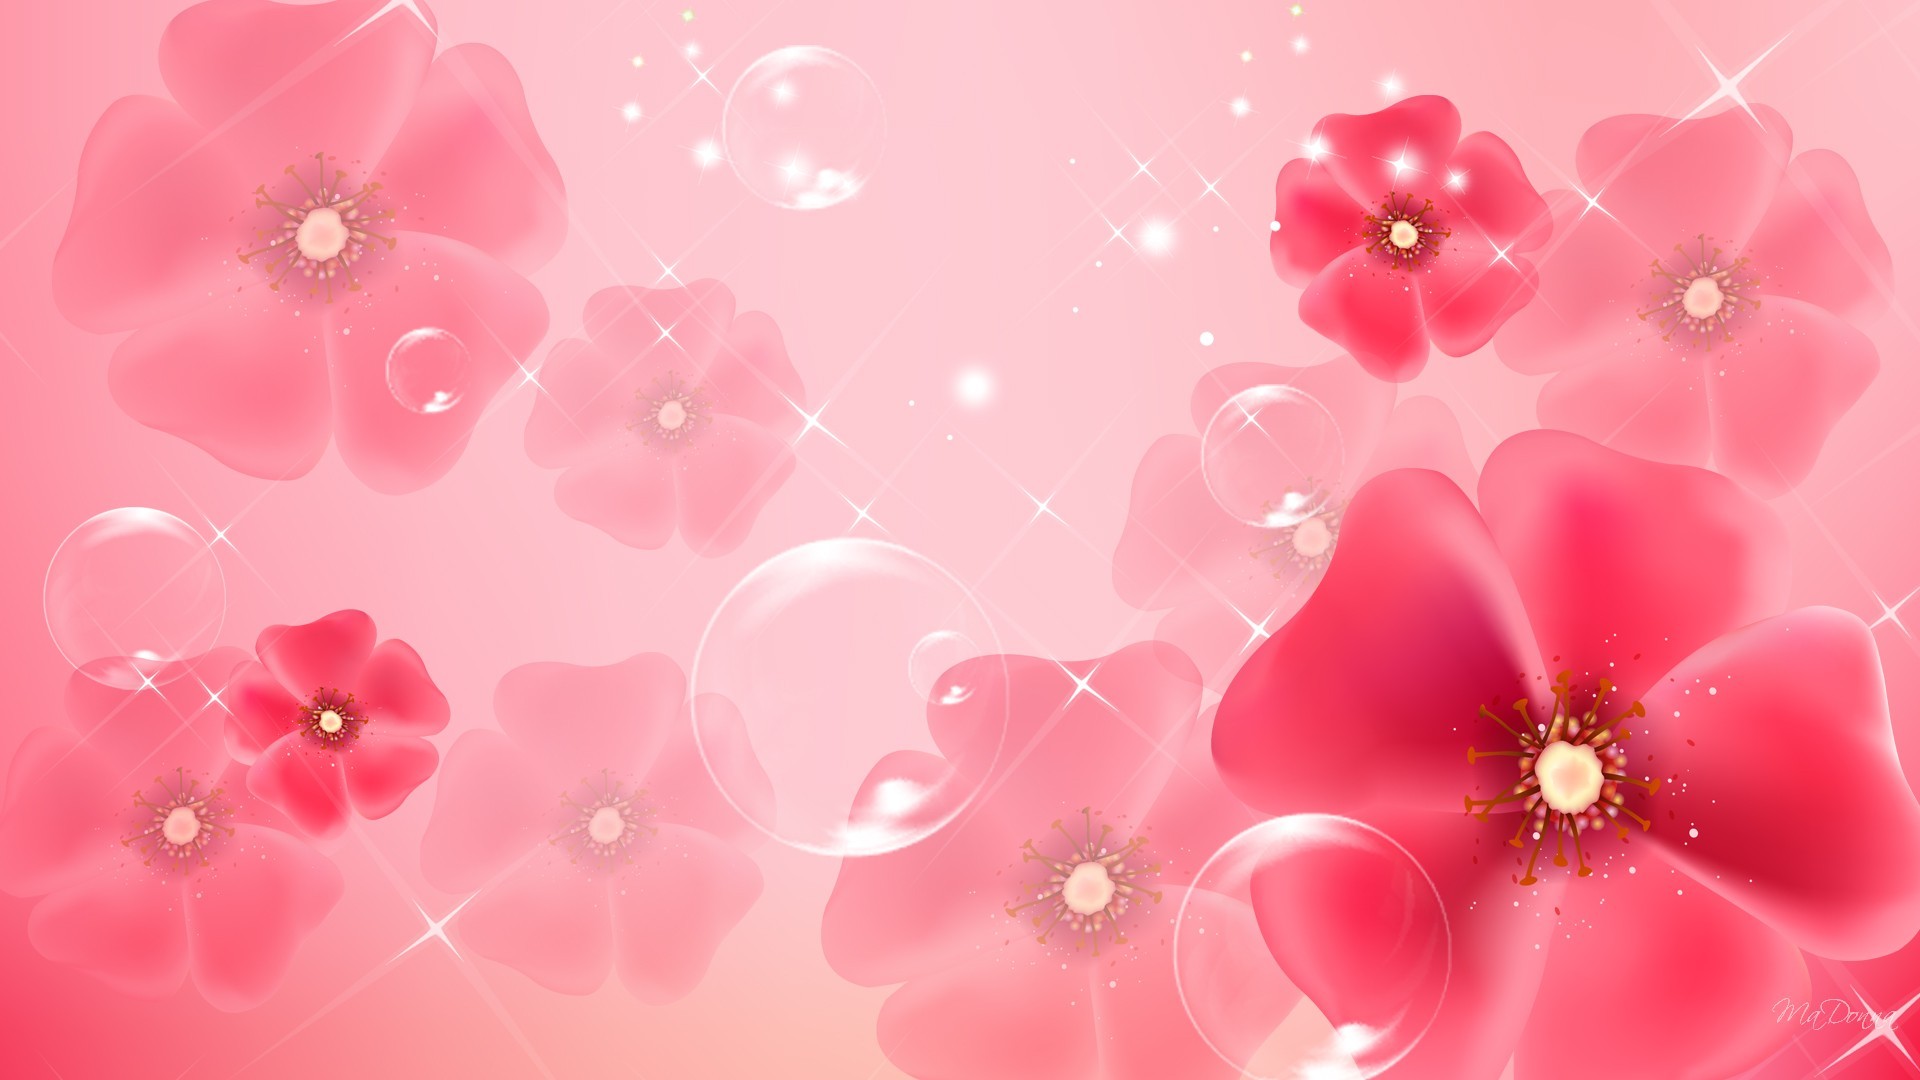 1920x1080 Awesome Pink Backgrounds Group (72 ) Pinterest Computer ...